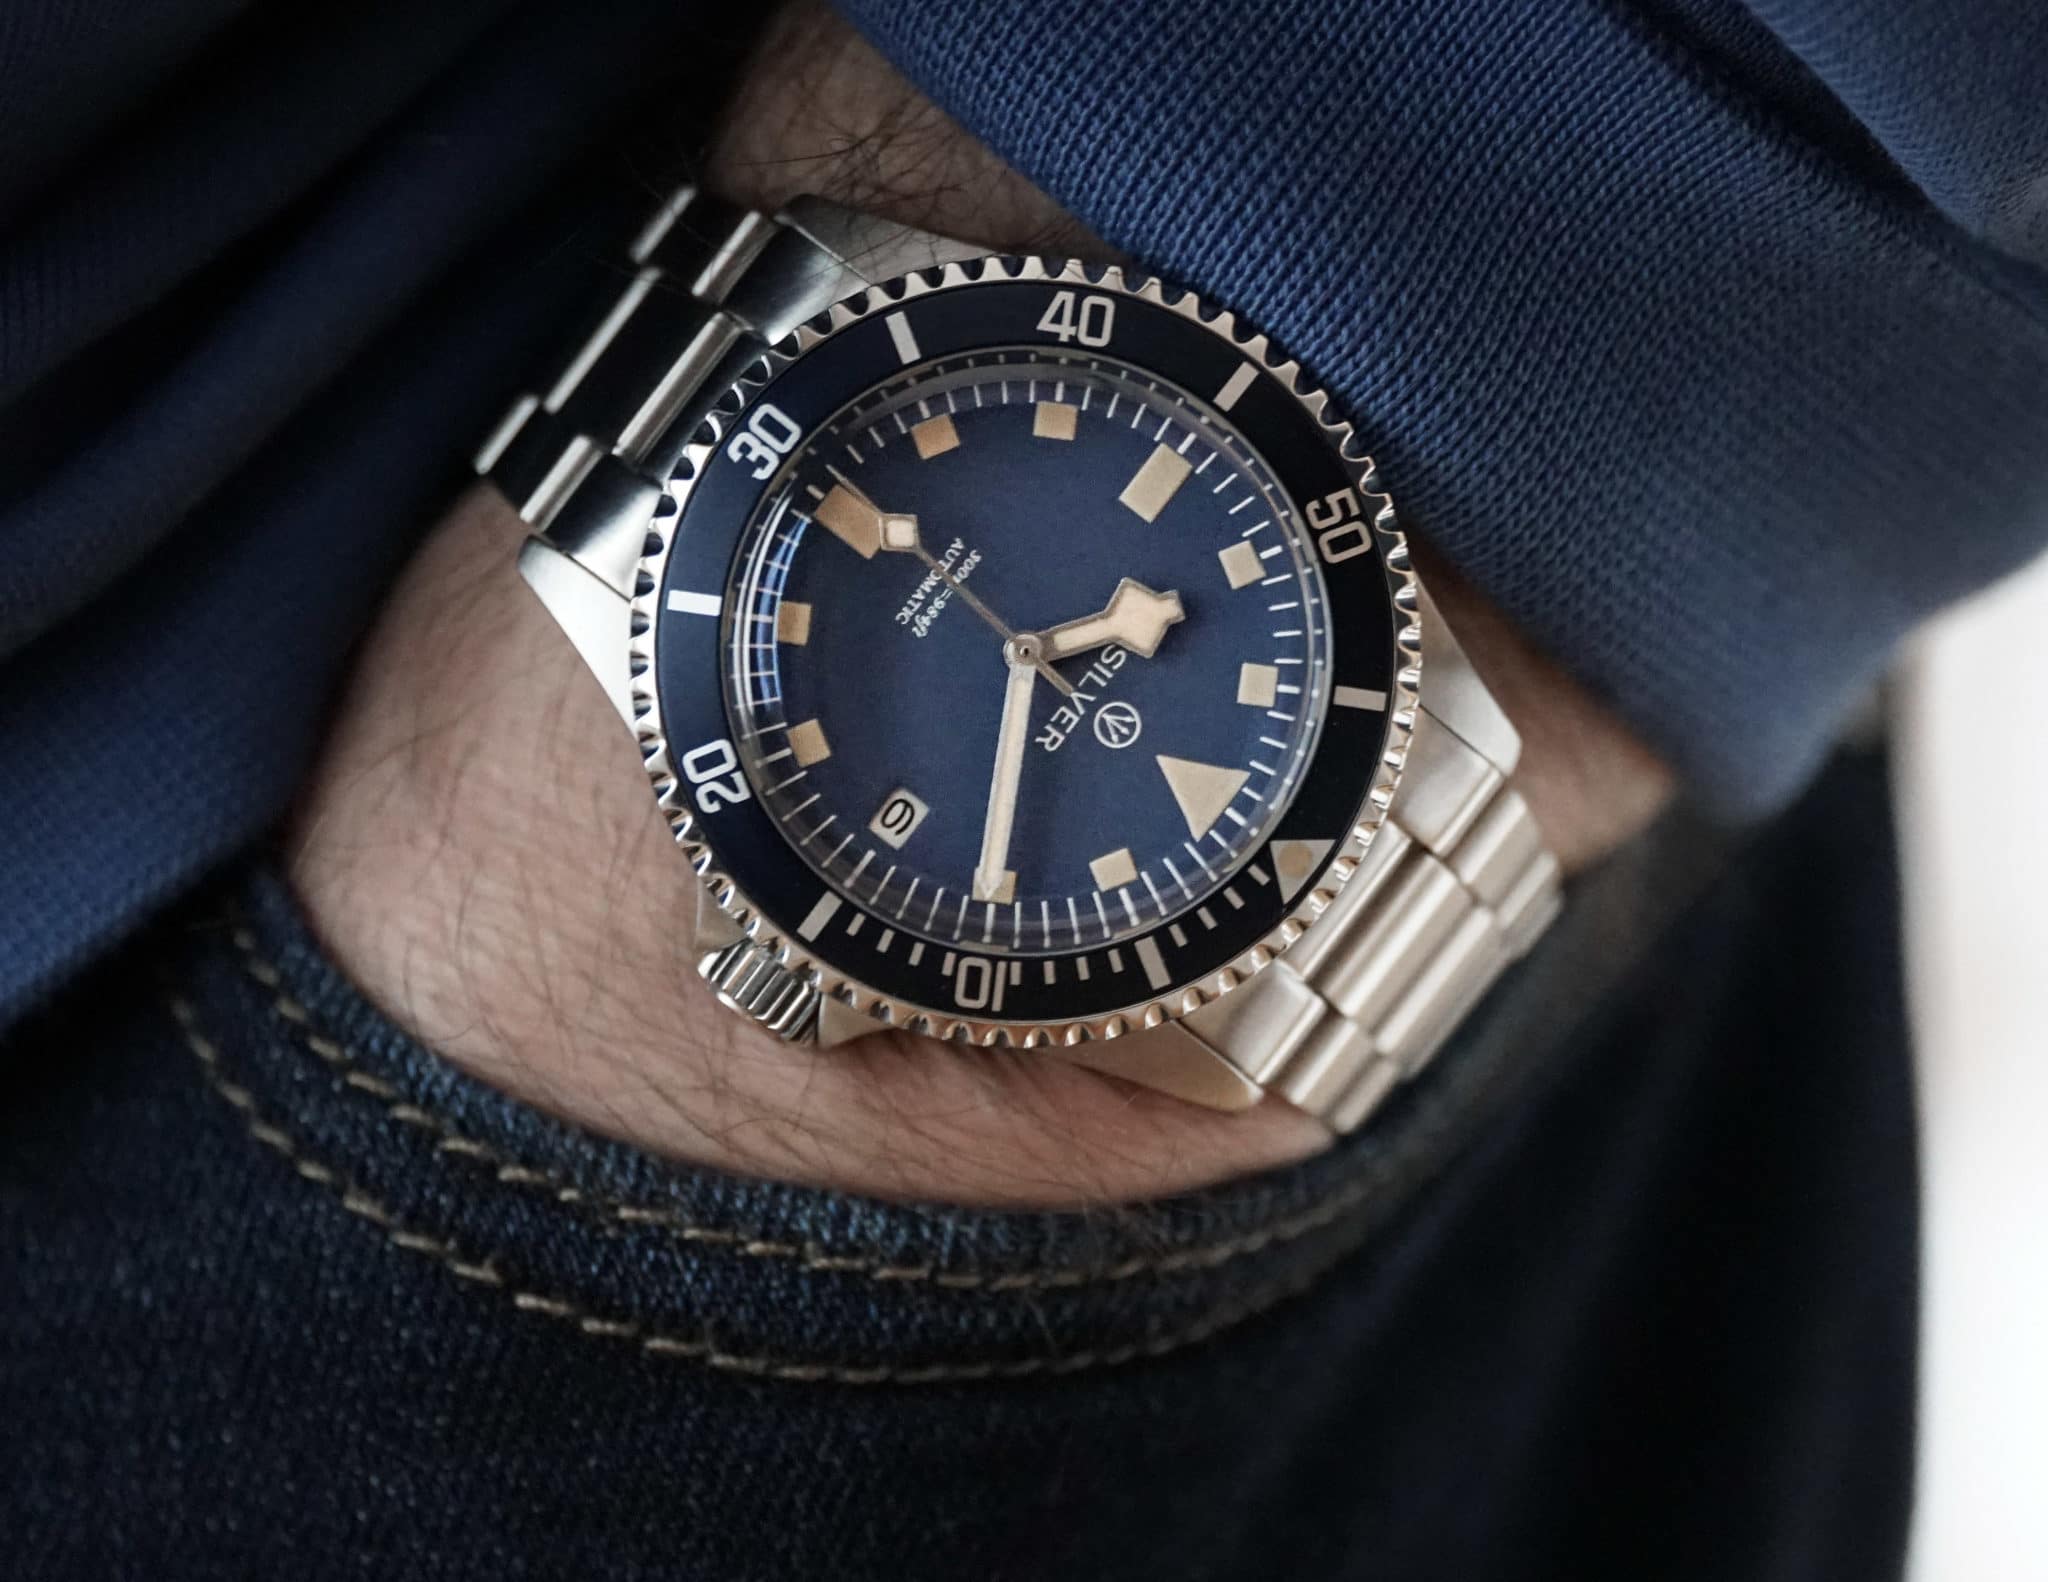 Silver Archetype One Review - Breaking Down A Tudor Submariner Homage ...